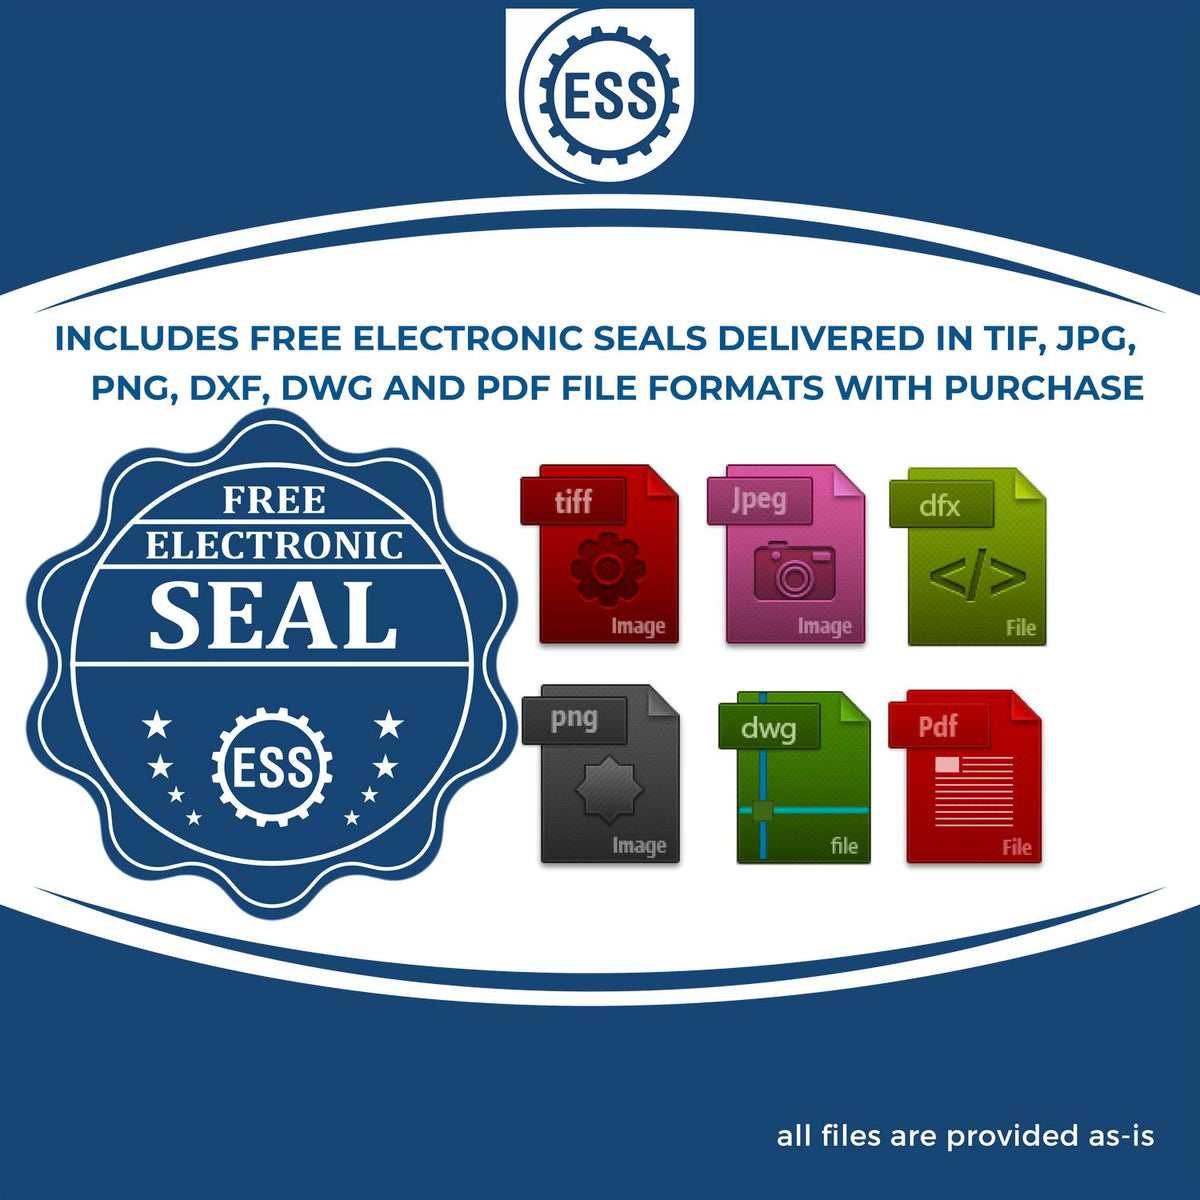 An infographic for the free electronic seal for the Heavy Duty Cast Iron New Mexico Engineer Seal Embosser illustrating the different file type icons such as DXF, DWG, TIF, JPG and PNG.